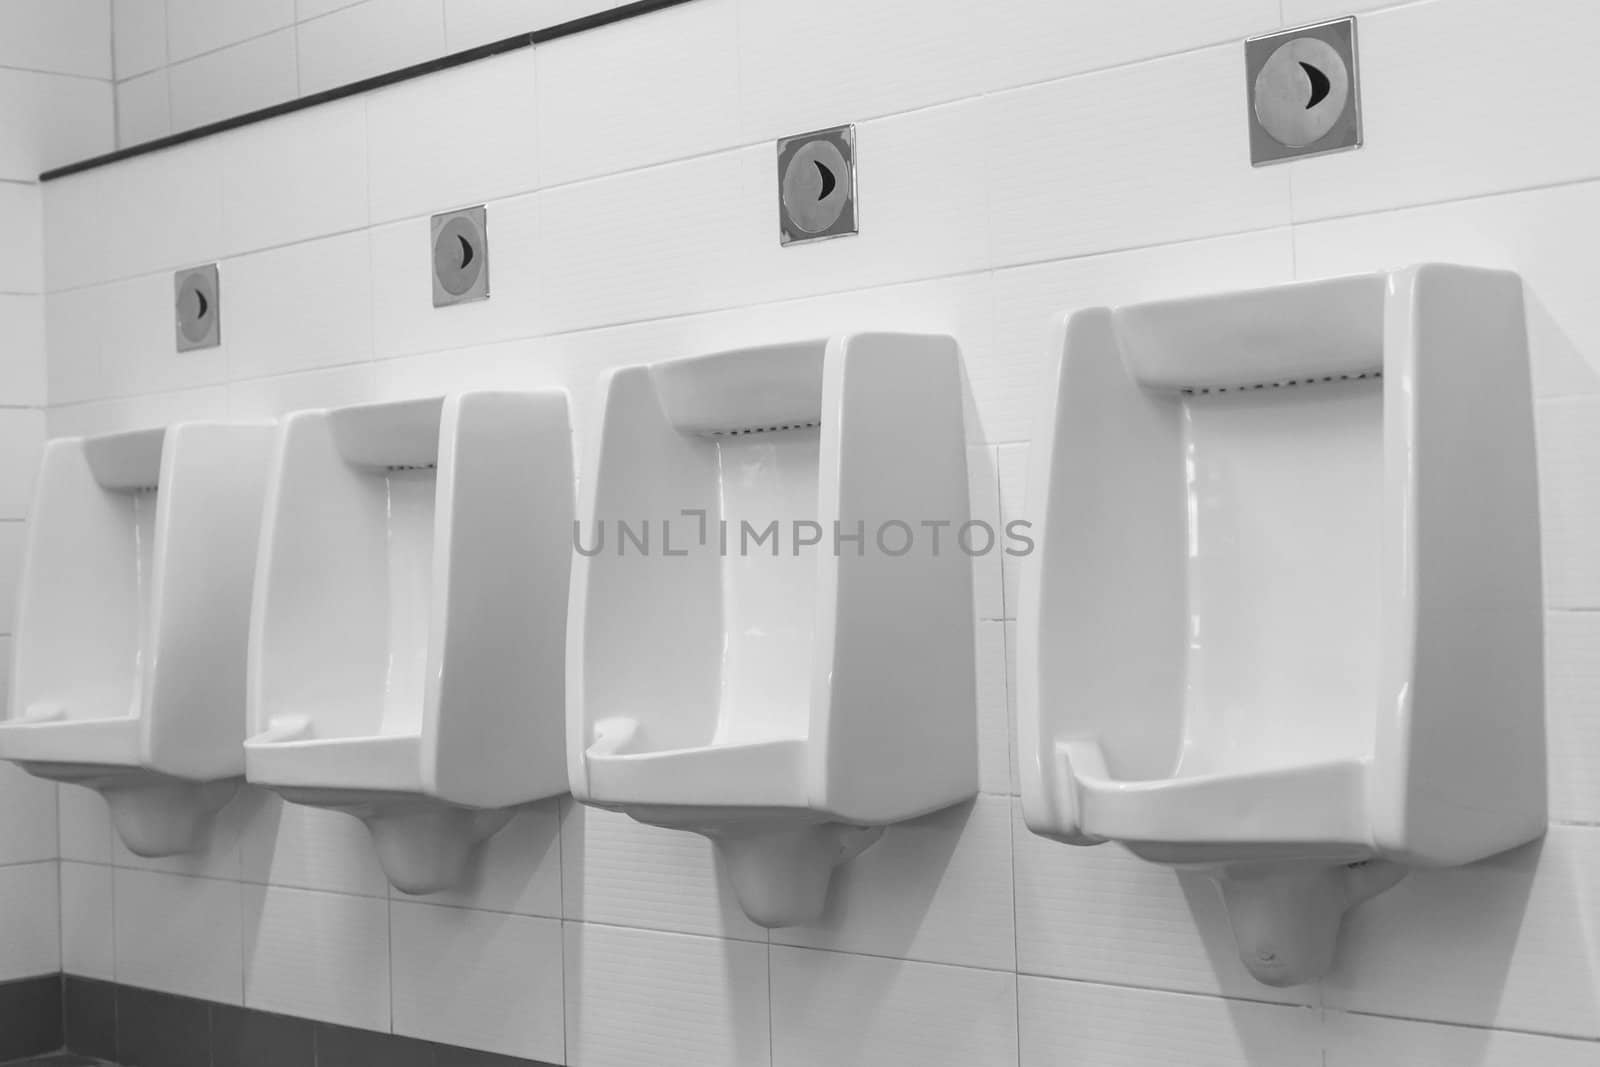 Toilets by thanatip